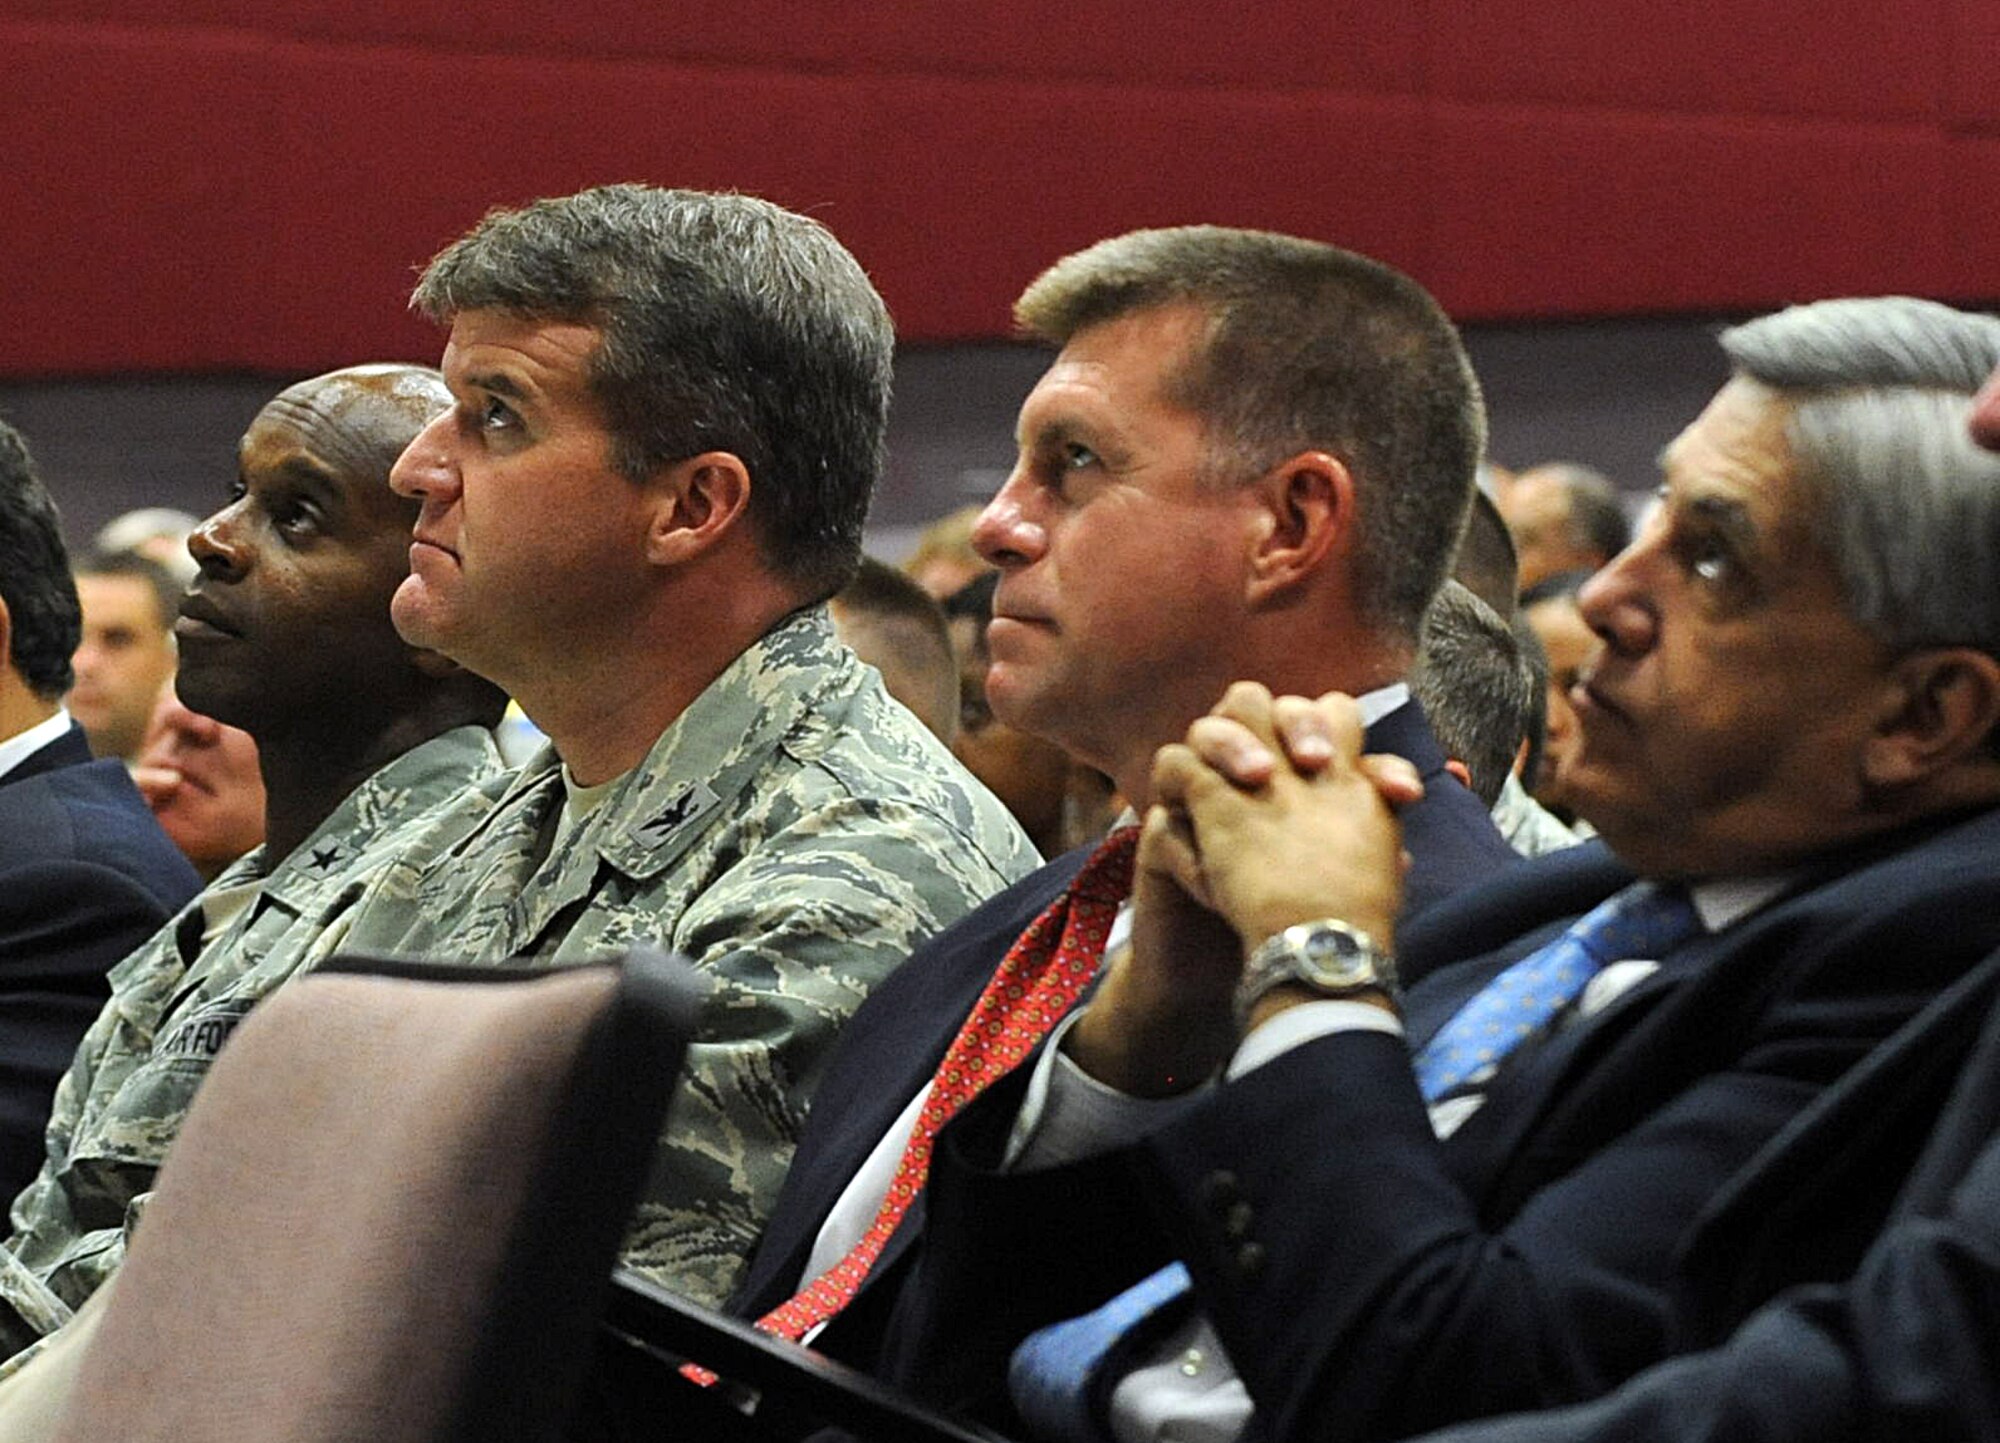 (Left to right) Brig. Gen. Cedric George, Warner Robins Air Logistics Complex commander; Col. Christopher Hill, Installation commander; William Swigert, AFSC Personnel Directorate director; and Jose Aragon, AFSC Financial Management and Comptroller director; listen as Lt. Gen. Litchfield drives home the message that Robins has the capability to conduct its mission better than anyone else, and stressed that working smarter doesn’t necessarily mean working faster. (U.S. Air Force photo by Tommie Horton)